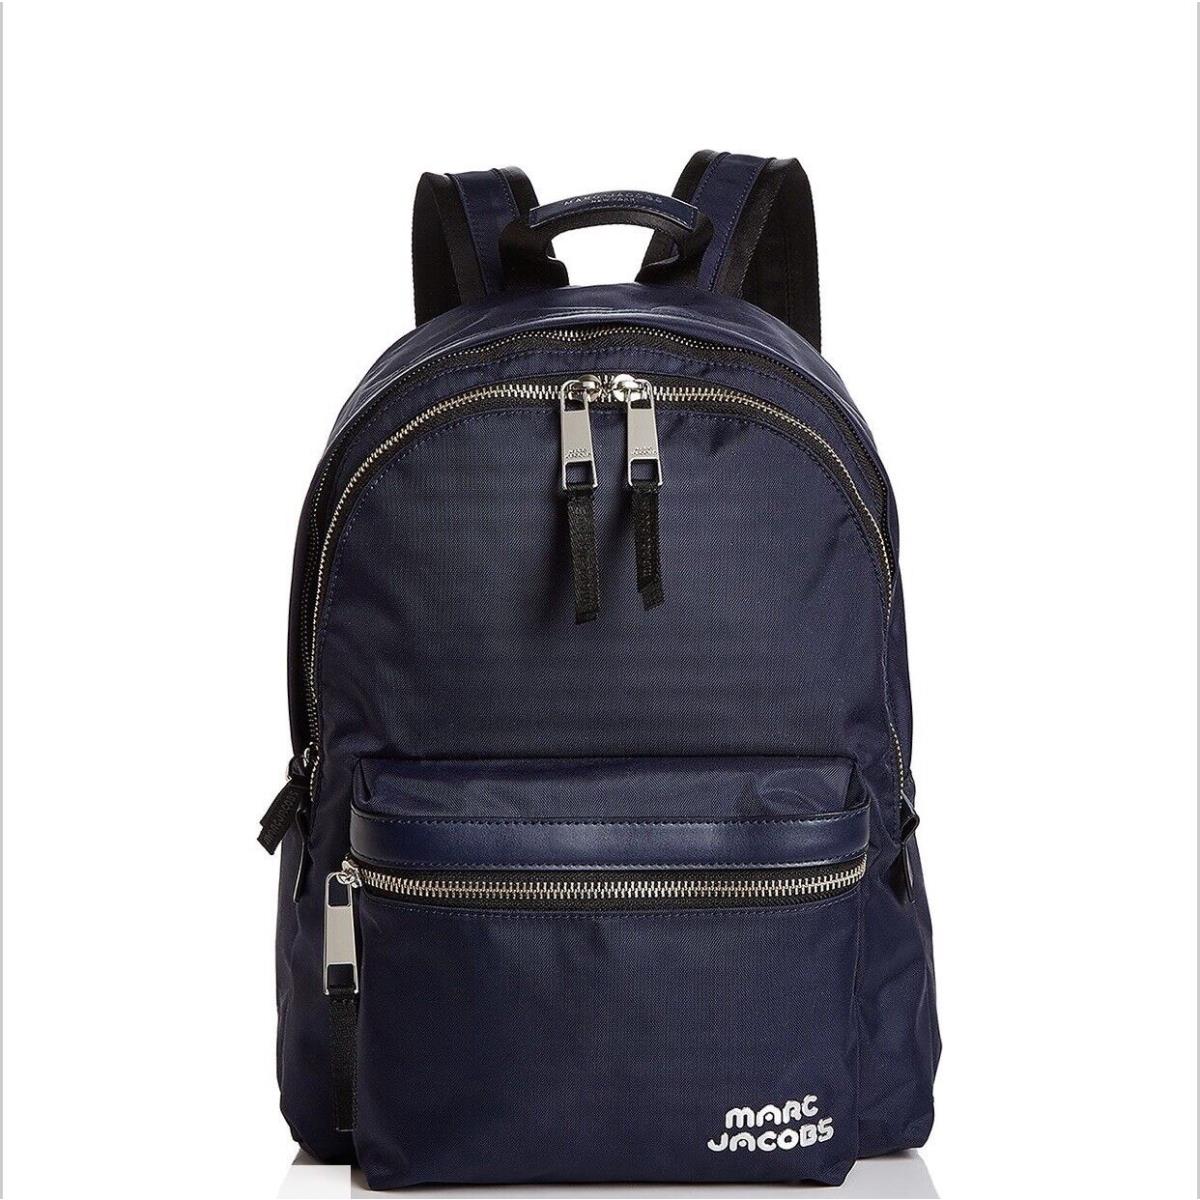 Marc Jacobs Large Nylon Backpack in Midnight Blue